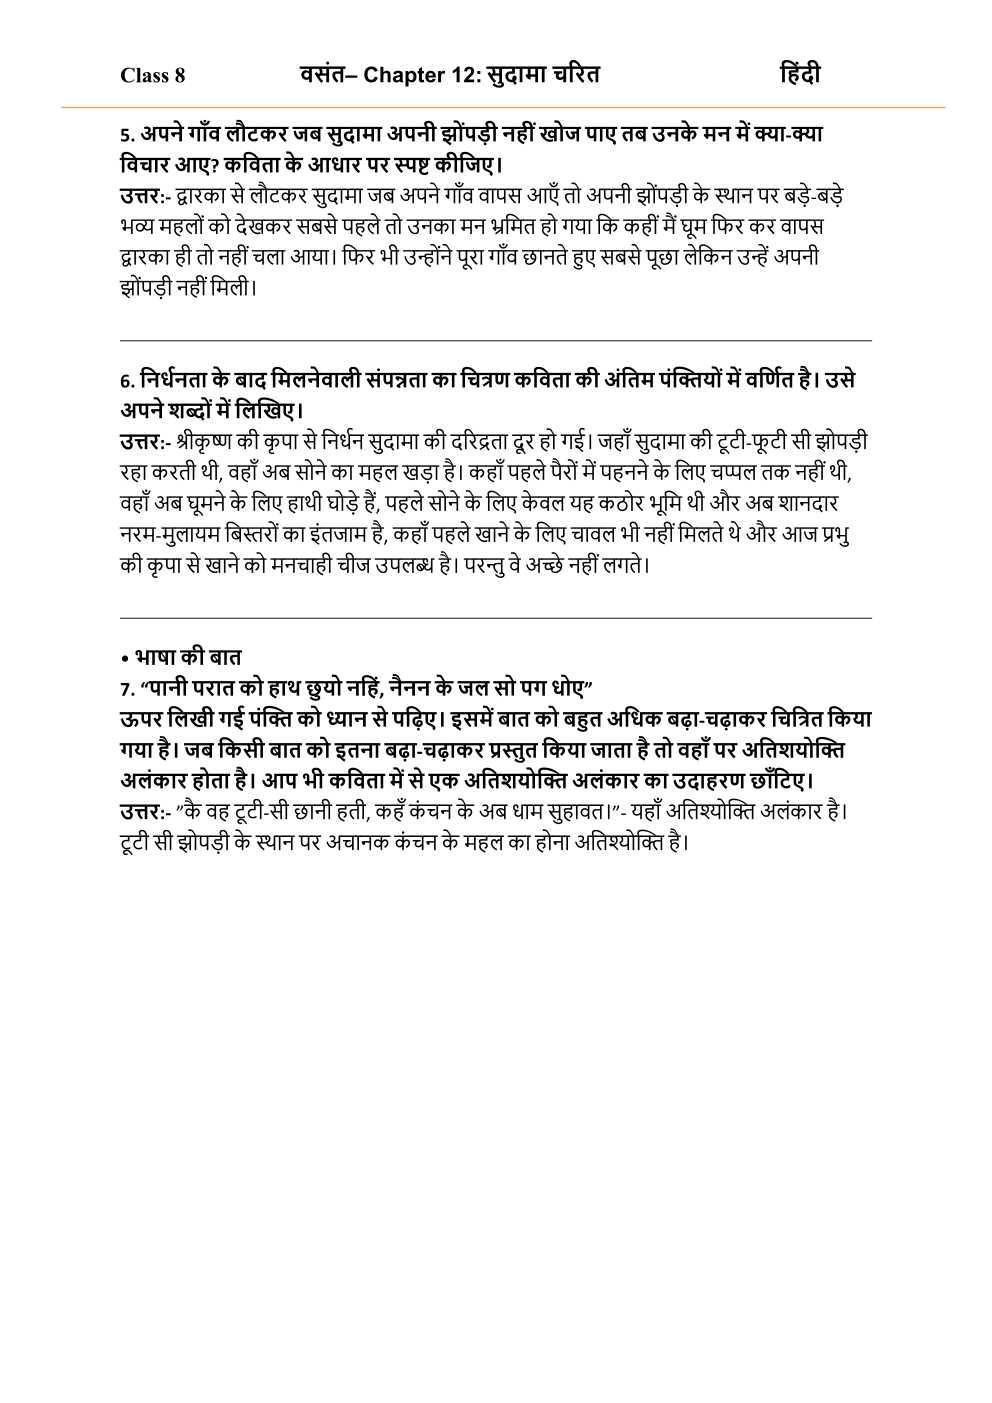 NCERT Solutions For Class 8 Hindi Vasant Chapter 12